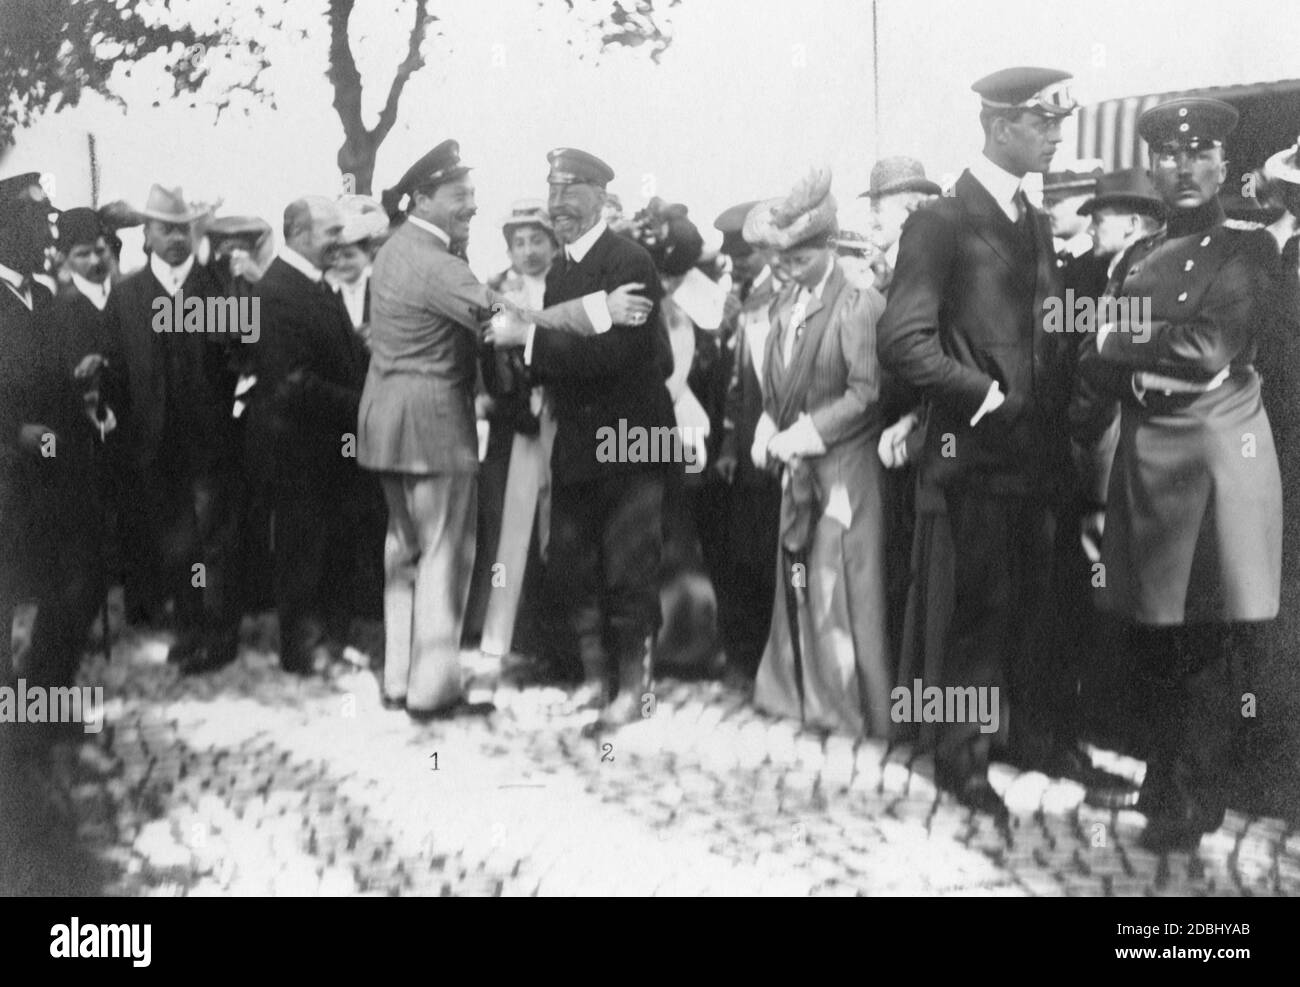 Grand Duke Ernest Louis of Hesse-Darmstadt (centre left) and Prince Henry of Prussia (centre right) embrace and greet each other. They are standing on the Hanauer Landstrasse in Frankfurt am Main at the finish of the third Herkomer competition, which ended there on June 13, 1907. Stock Photo